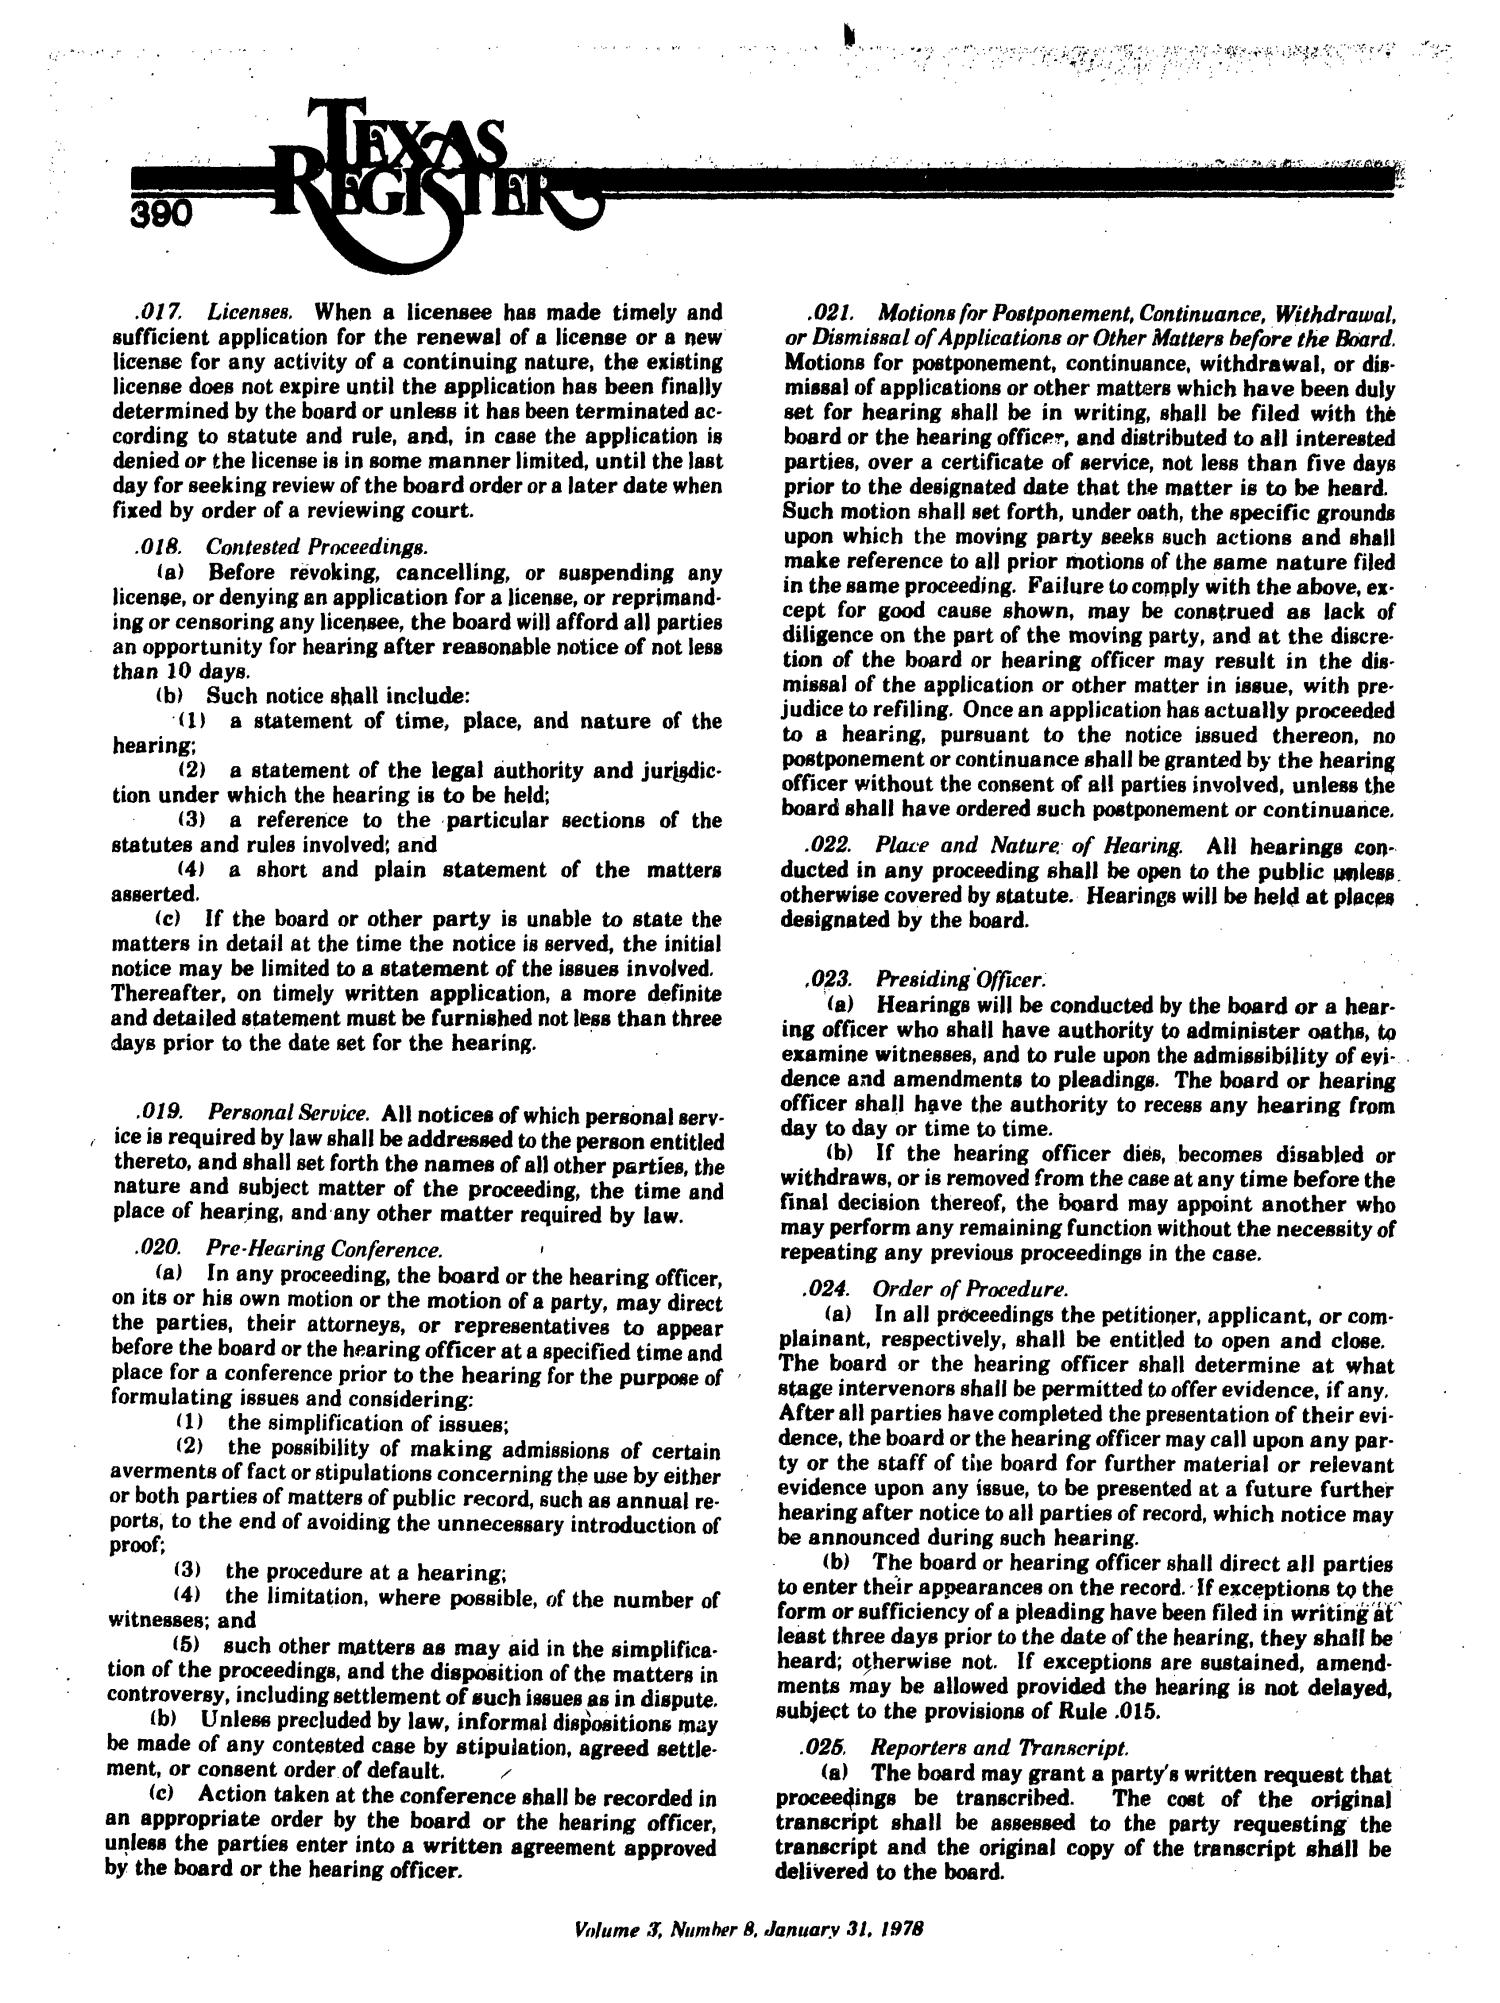 Texas Register, Volume 3, Number 8, Pages 345-413, January 31, 1978
                                                
                                                    390
                                                